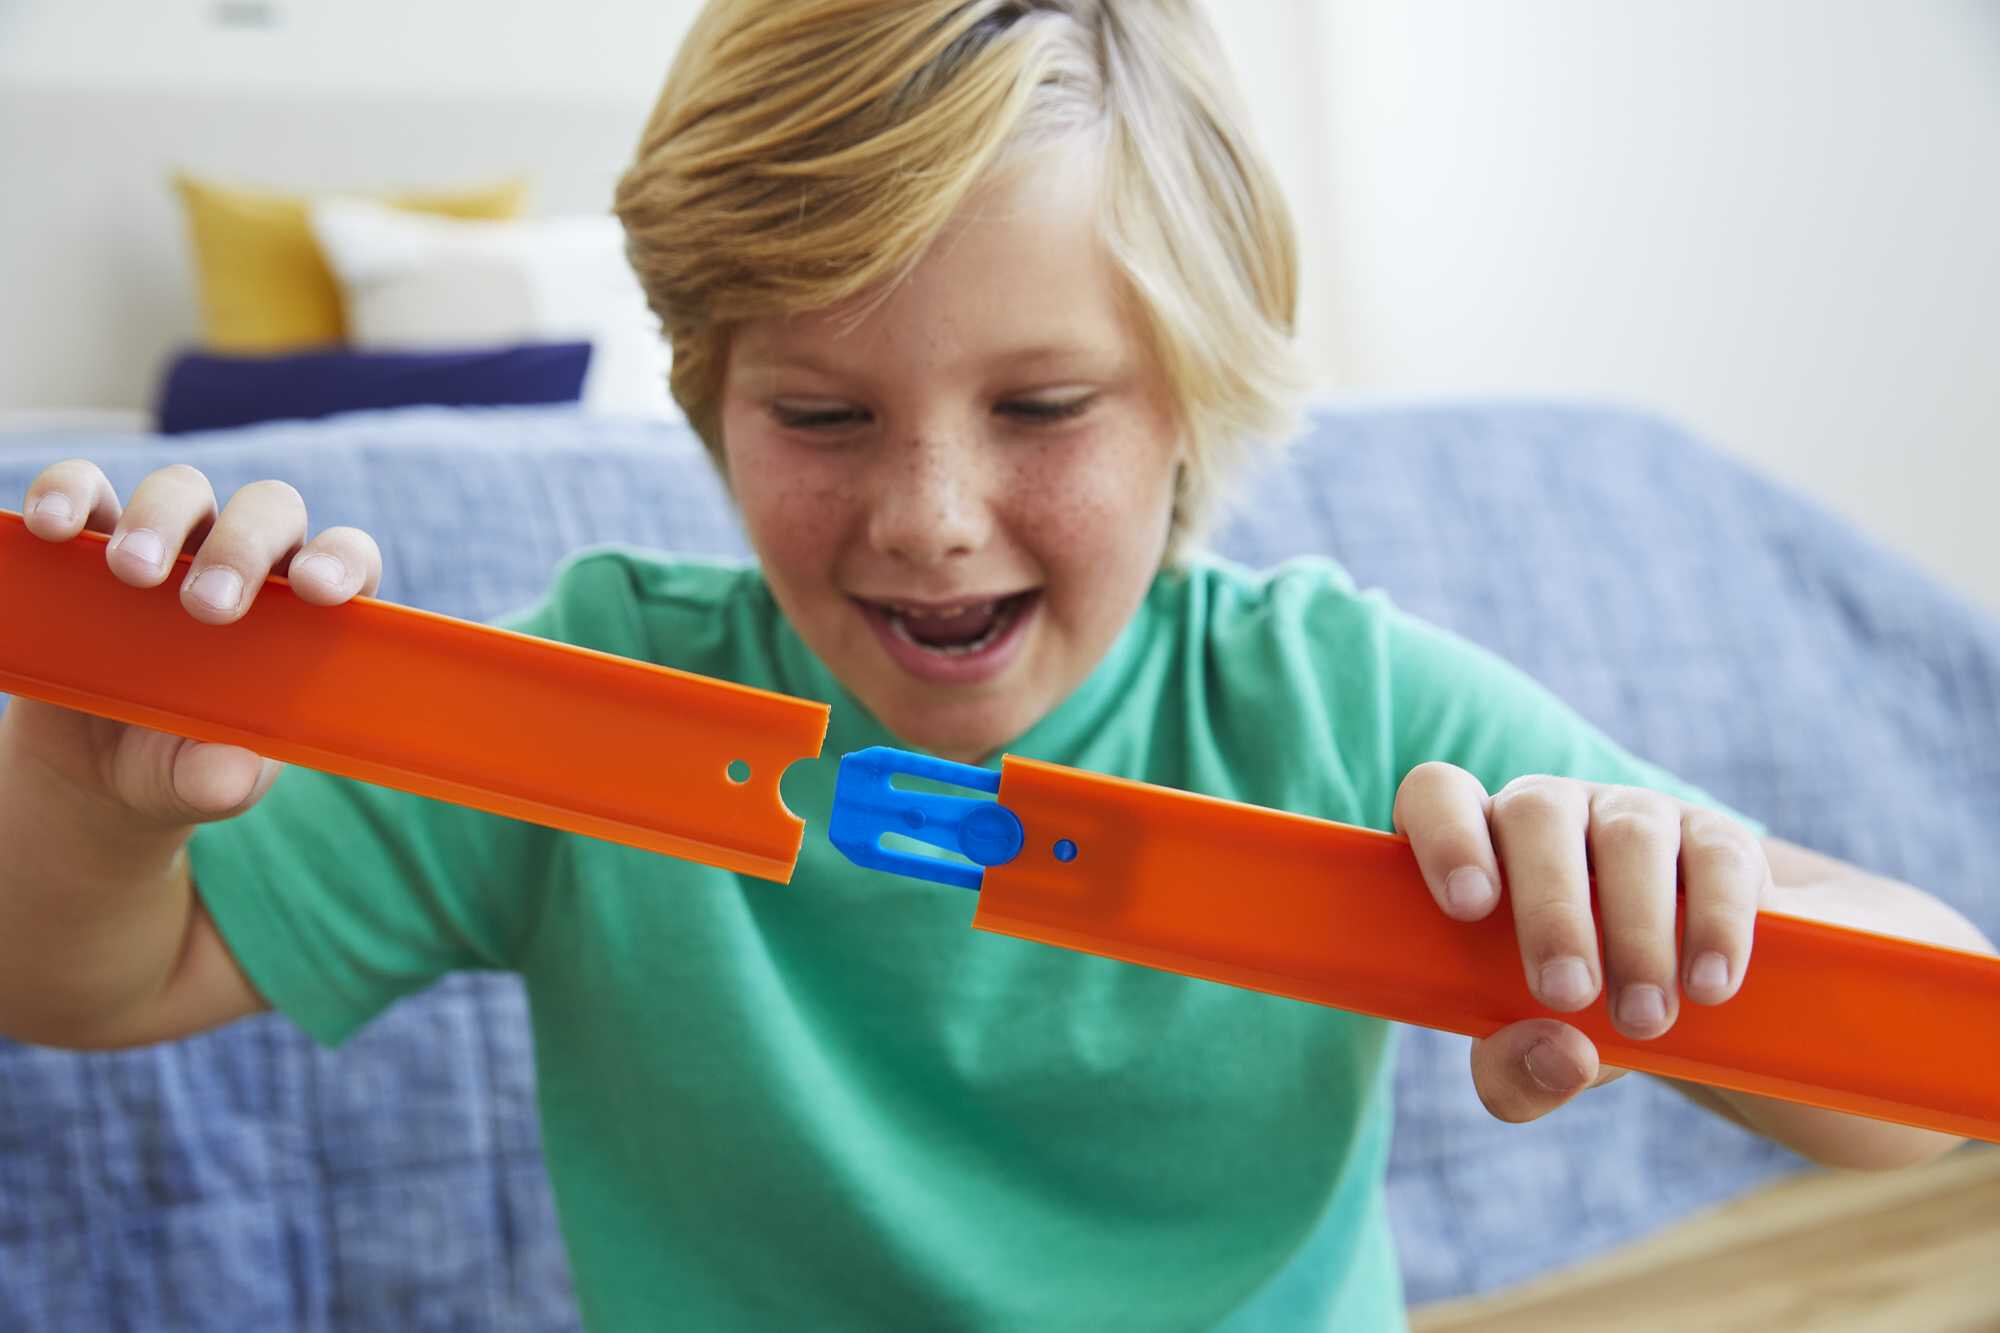 Hot Wheels Track Builder Unlimited Straight Track Pack, 4 Track Connectors & 4 Track Pieces - image 2 of 6